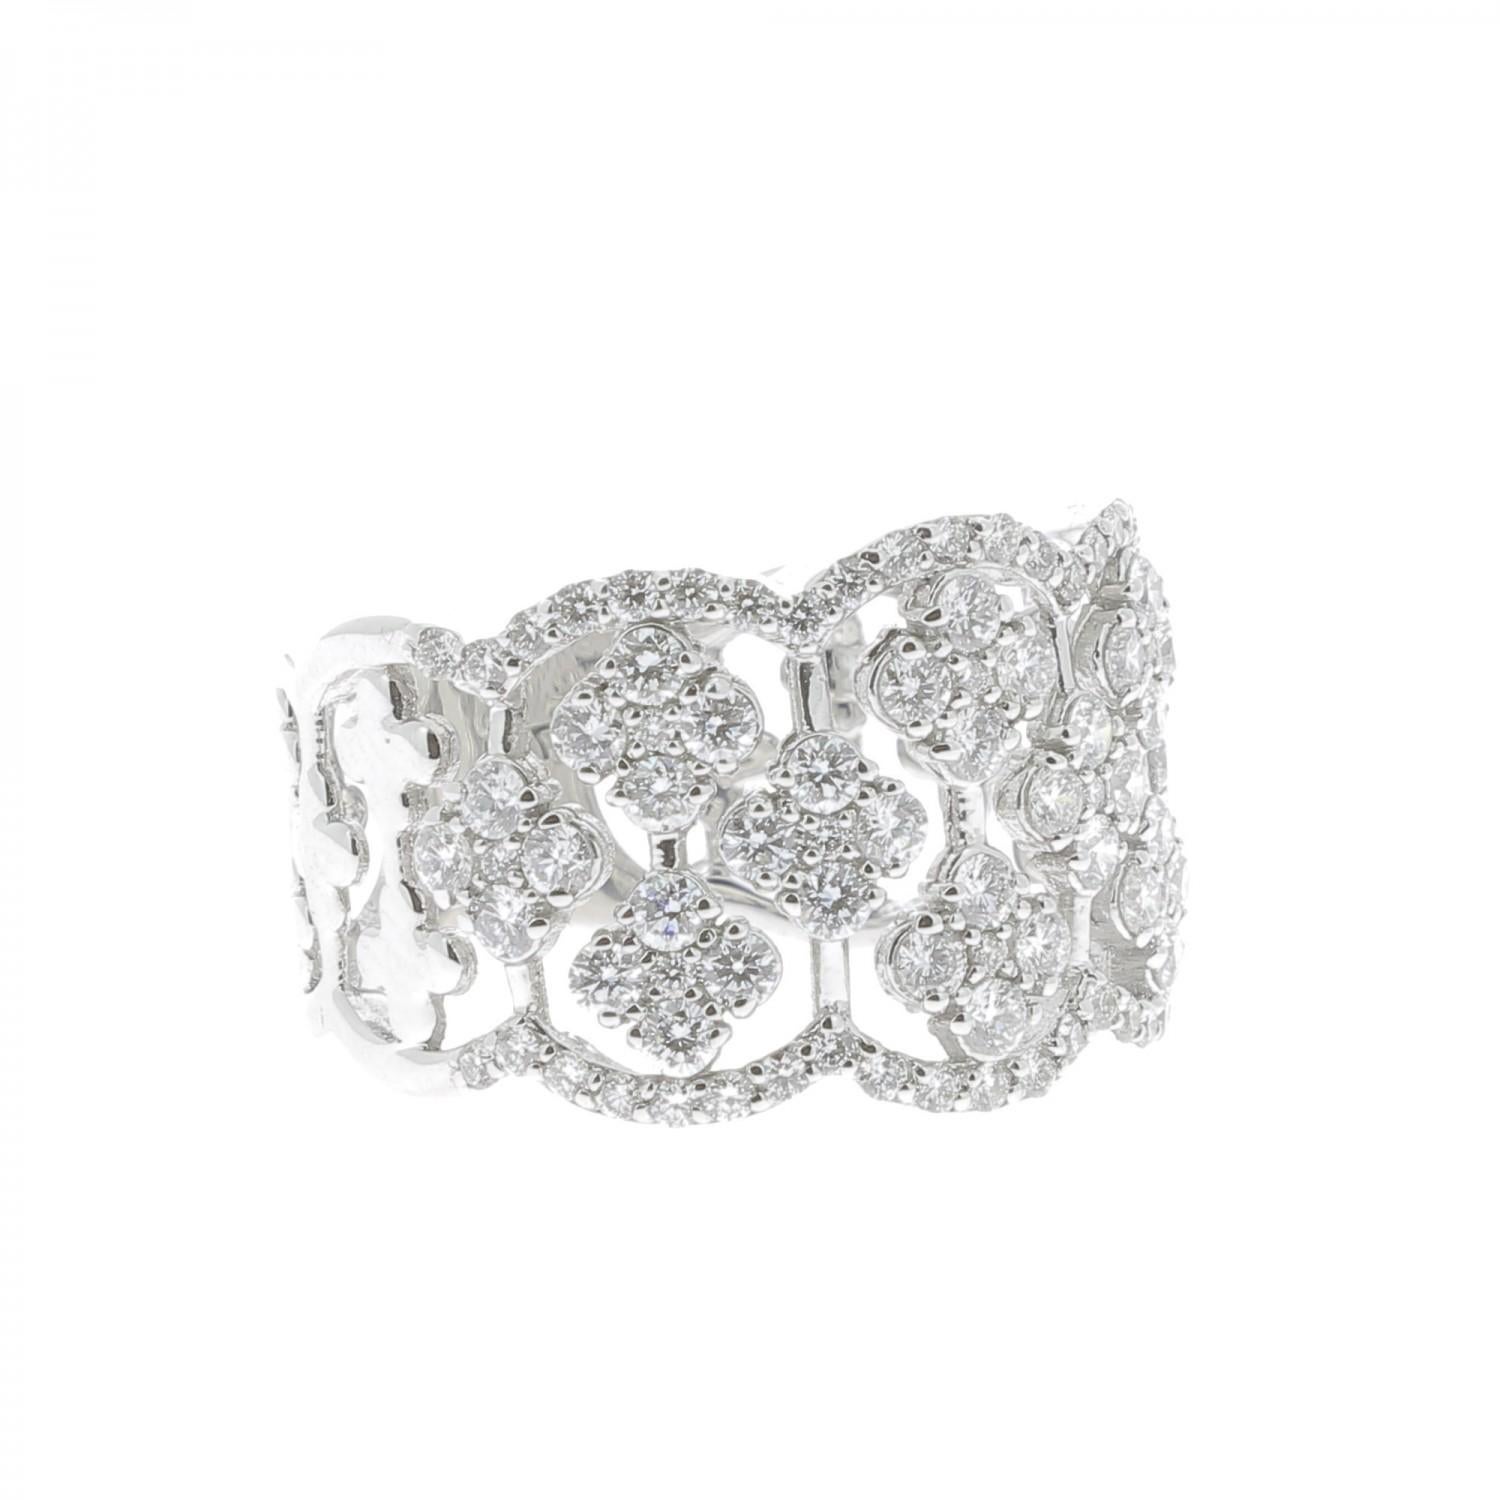 The Clover Ring is a unique and trendy ring set with 1.42 carat, the ring is paved with clovers shape set with Brilliants cut diamonds.
The Diamonds weight is 1.42 Carat, the Ring is set in 18K White Gold.
The Fashion rings is made to order, which